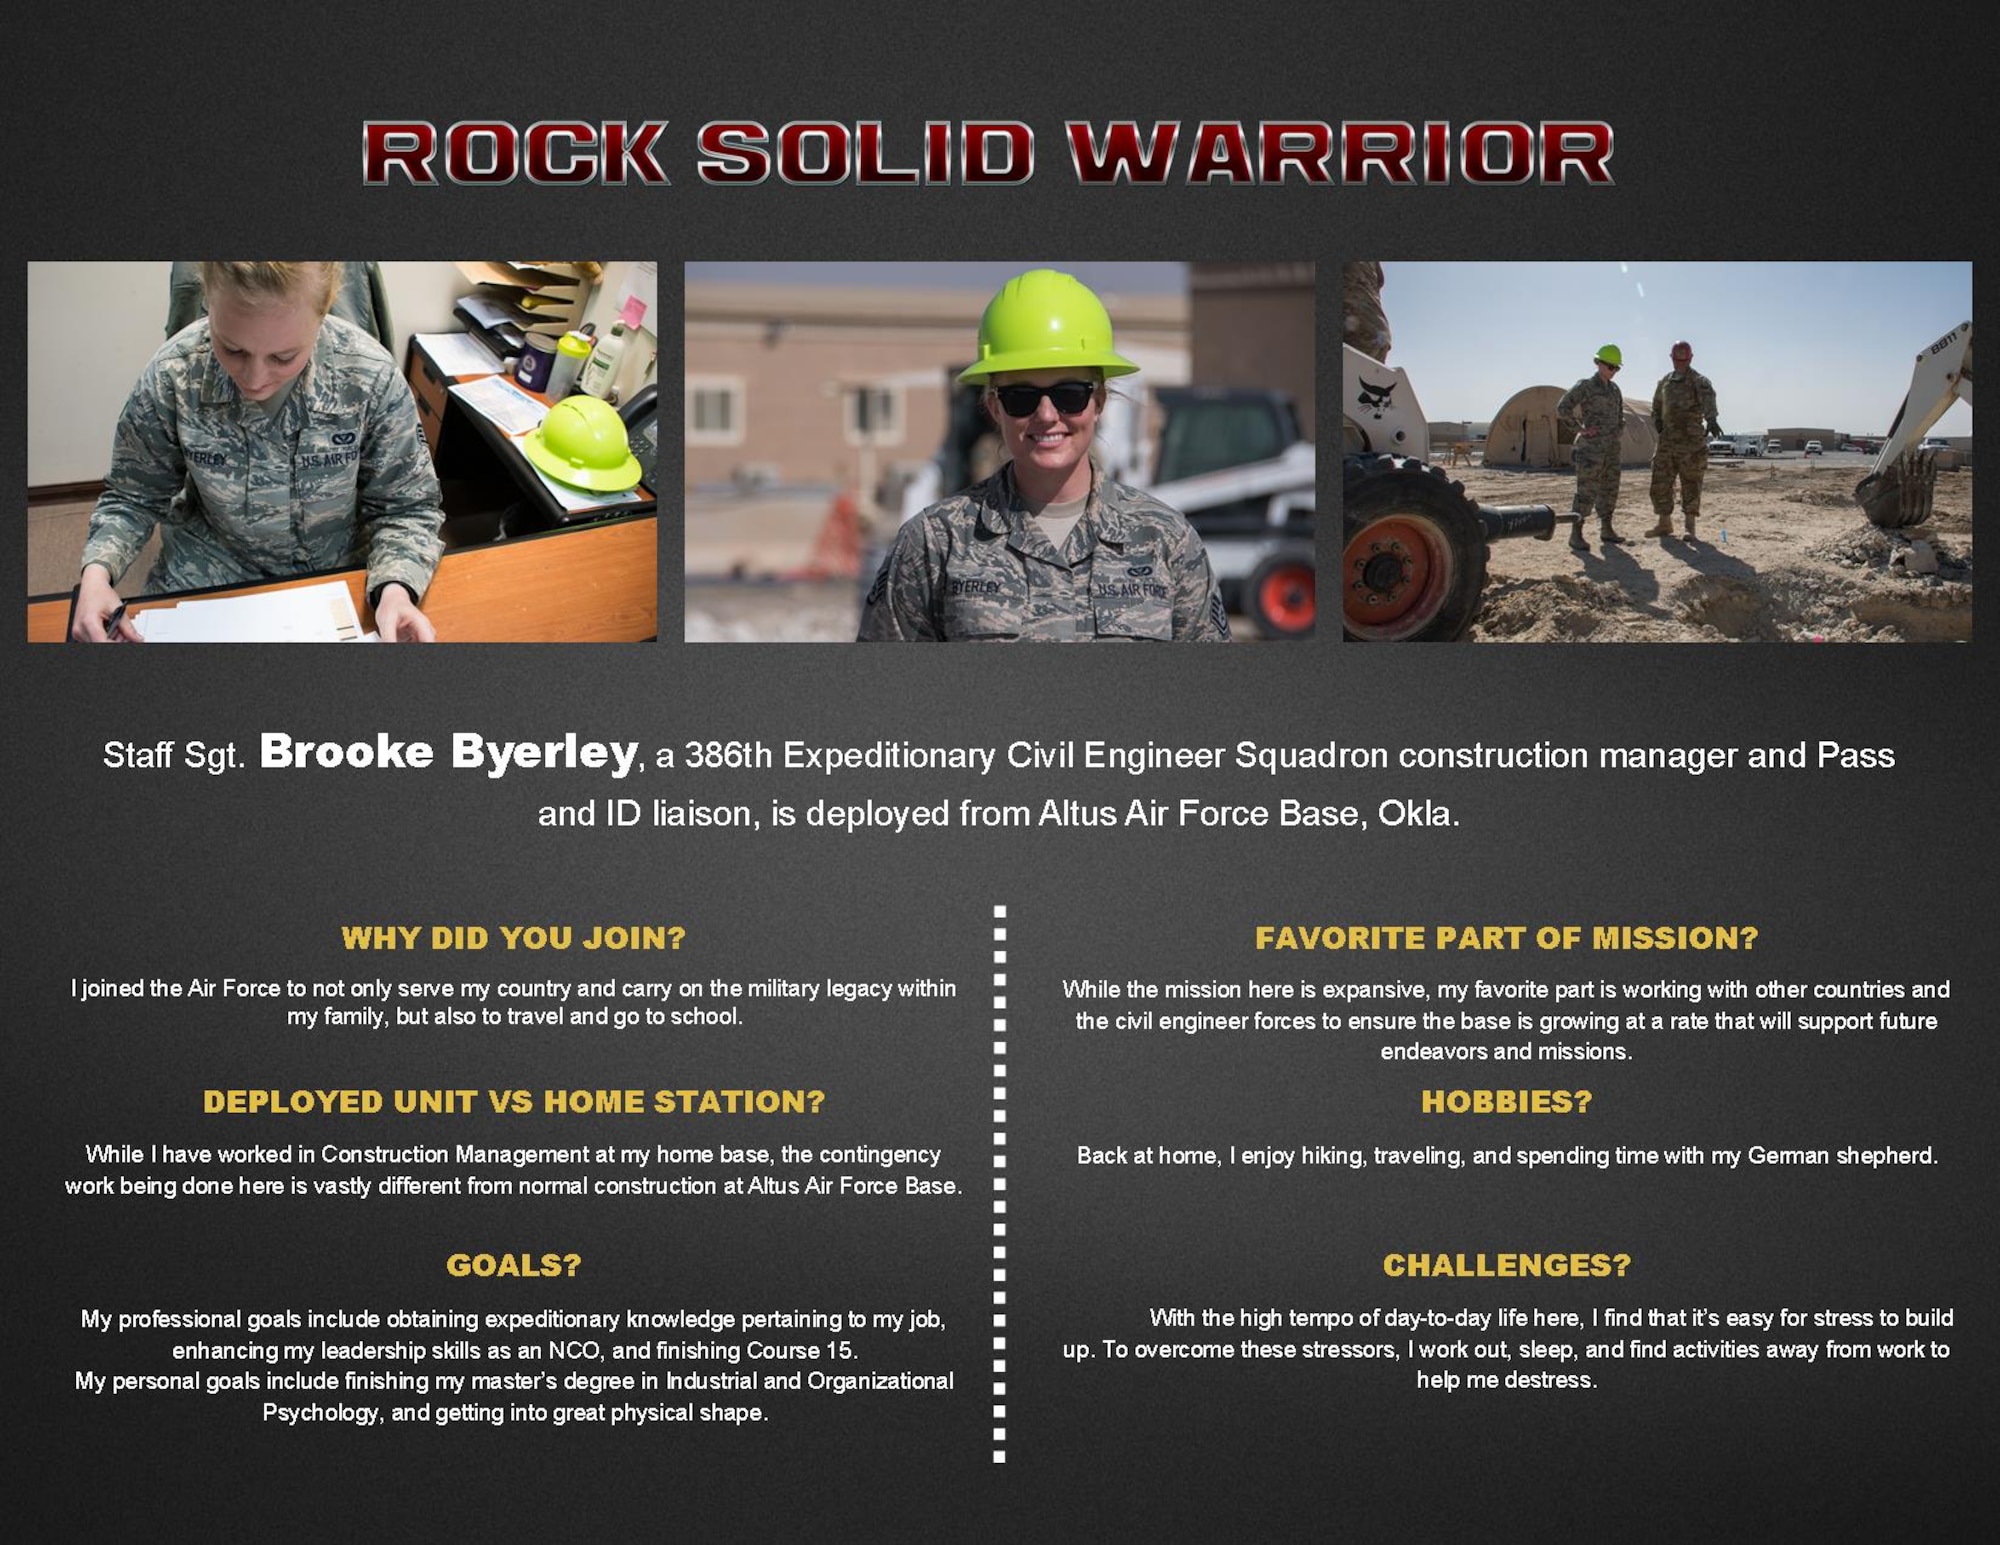 This week's Rock Solid Warrior is Staff Sgt. Brooke Byerley, a 386th Expeditionary Civil Engineer Squadron construction manager and Pass and ID liaison, deployed from Altus Air Force Base, Okla. The Rock Solid Warrior program is a way to recognize and spotlight the Airmen of the 386th Air Expeditionary Wing for their positive impact and commitment to the mission. (U.S. Air Force graphic/Senior Airman Andrew Park)